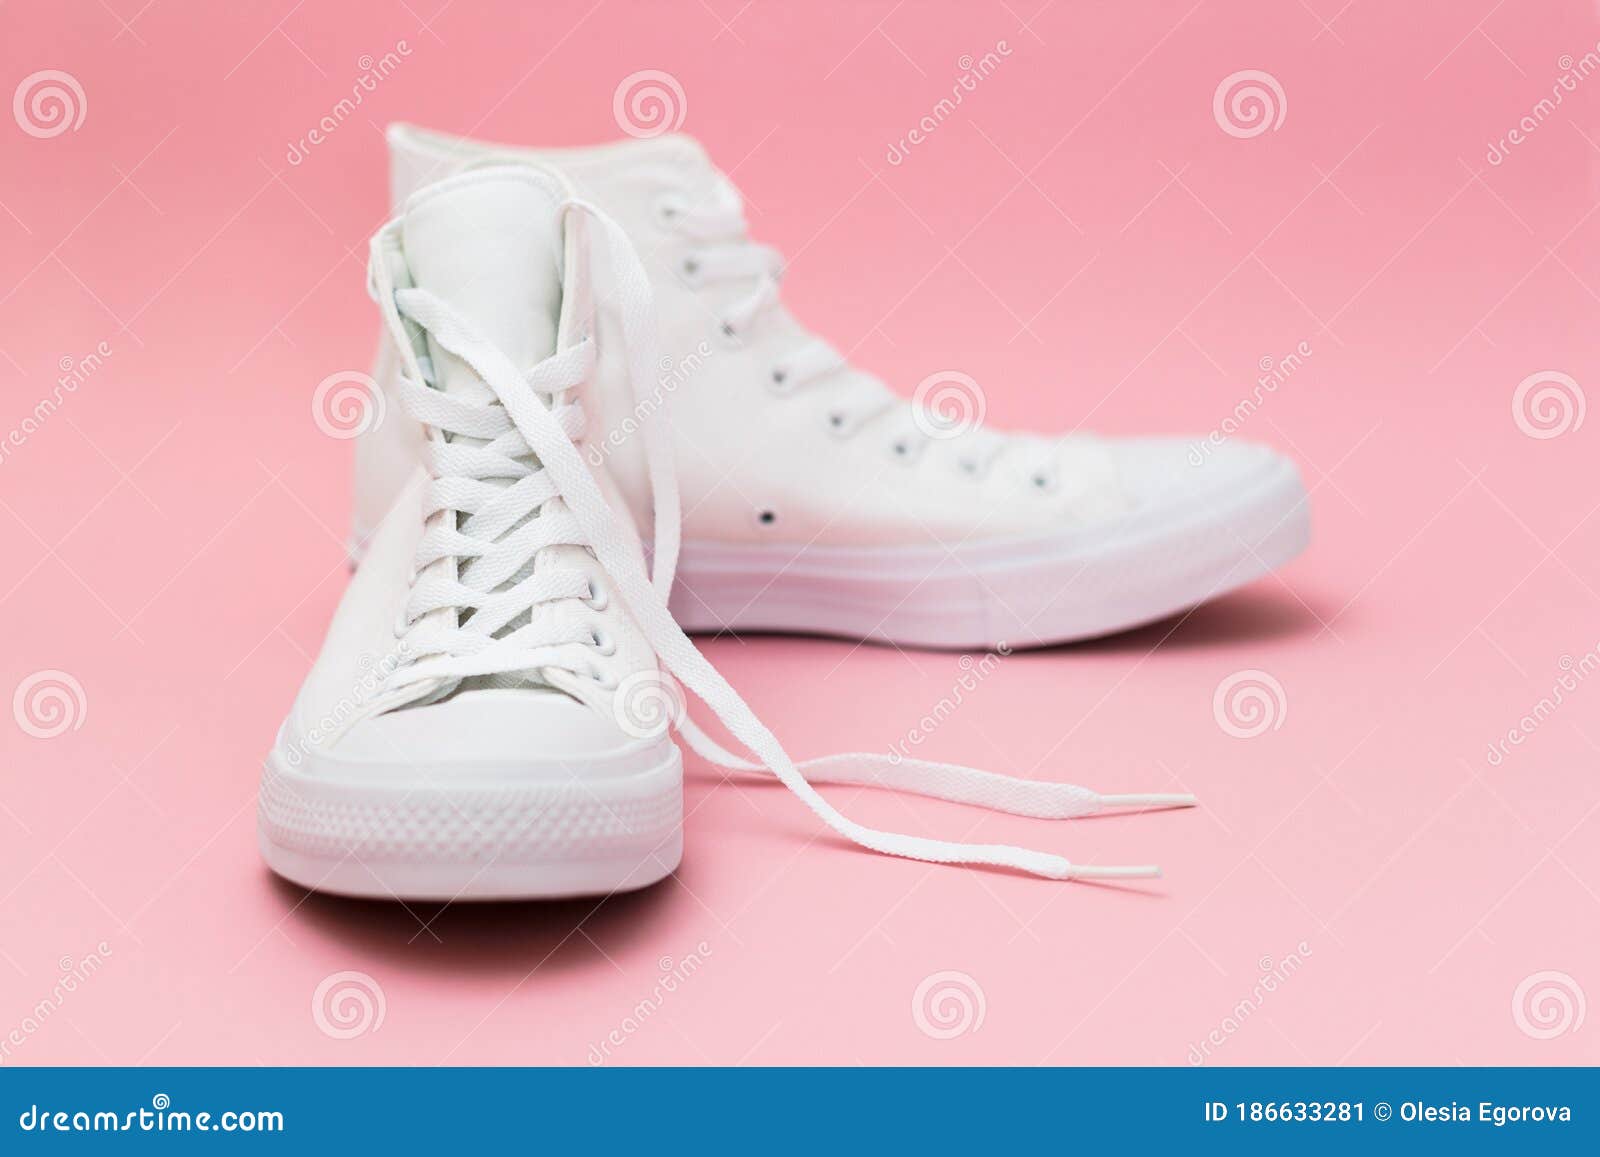 Pair of New White Sneakers on Pink Background Stock Image - Image of ...